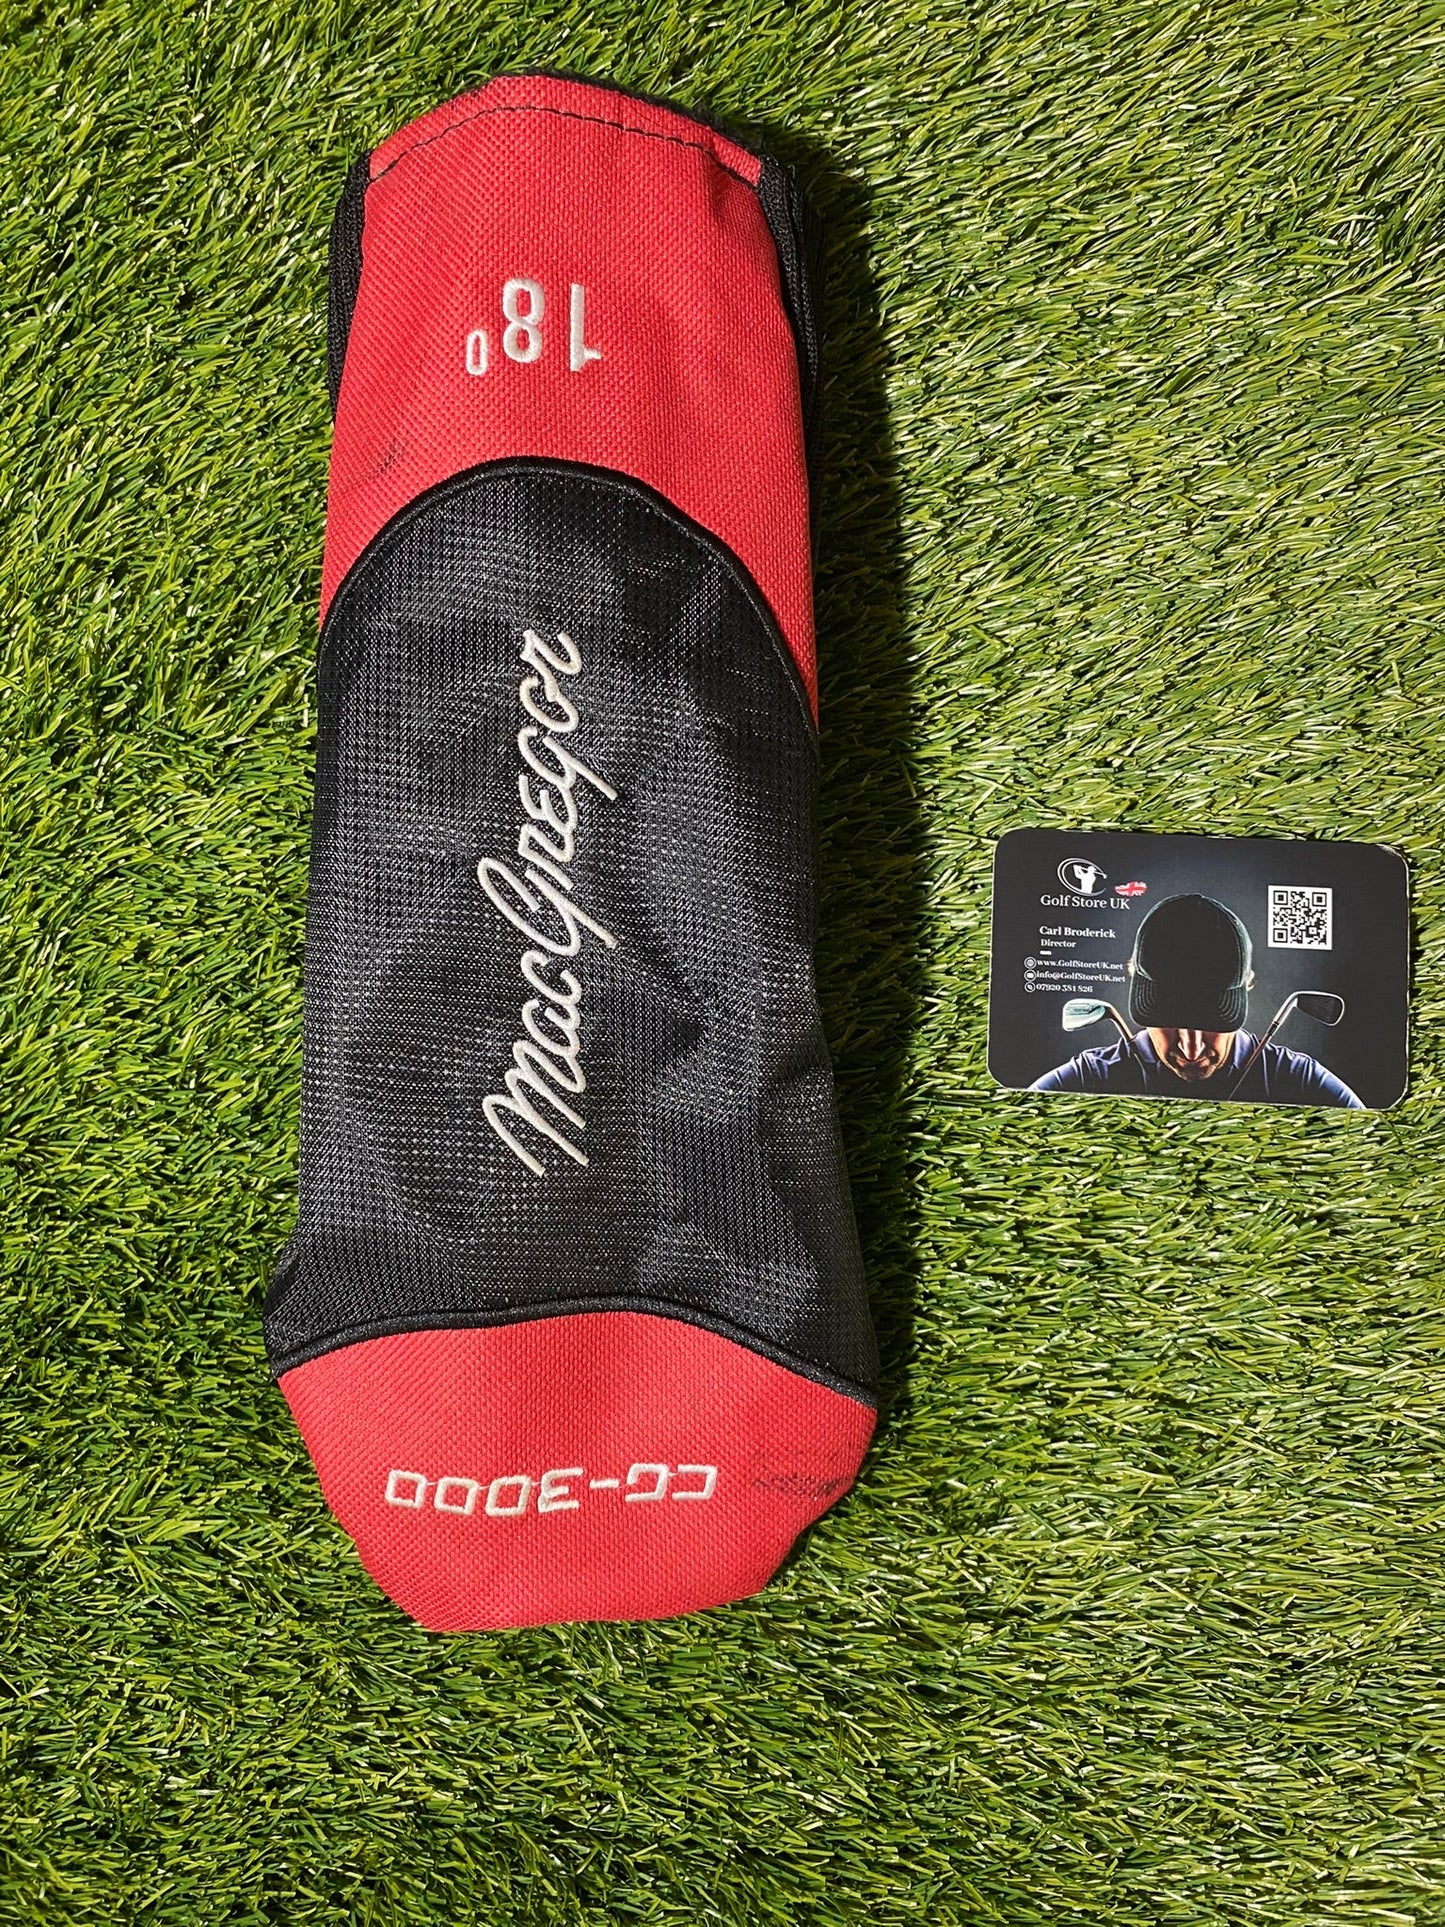 MacGregor CG-3000 18 Degree Wood, Headcover included - Golf Store UK